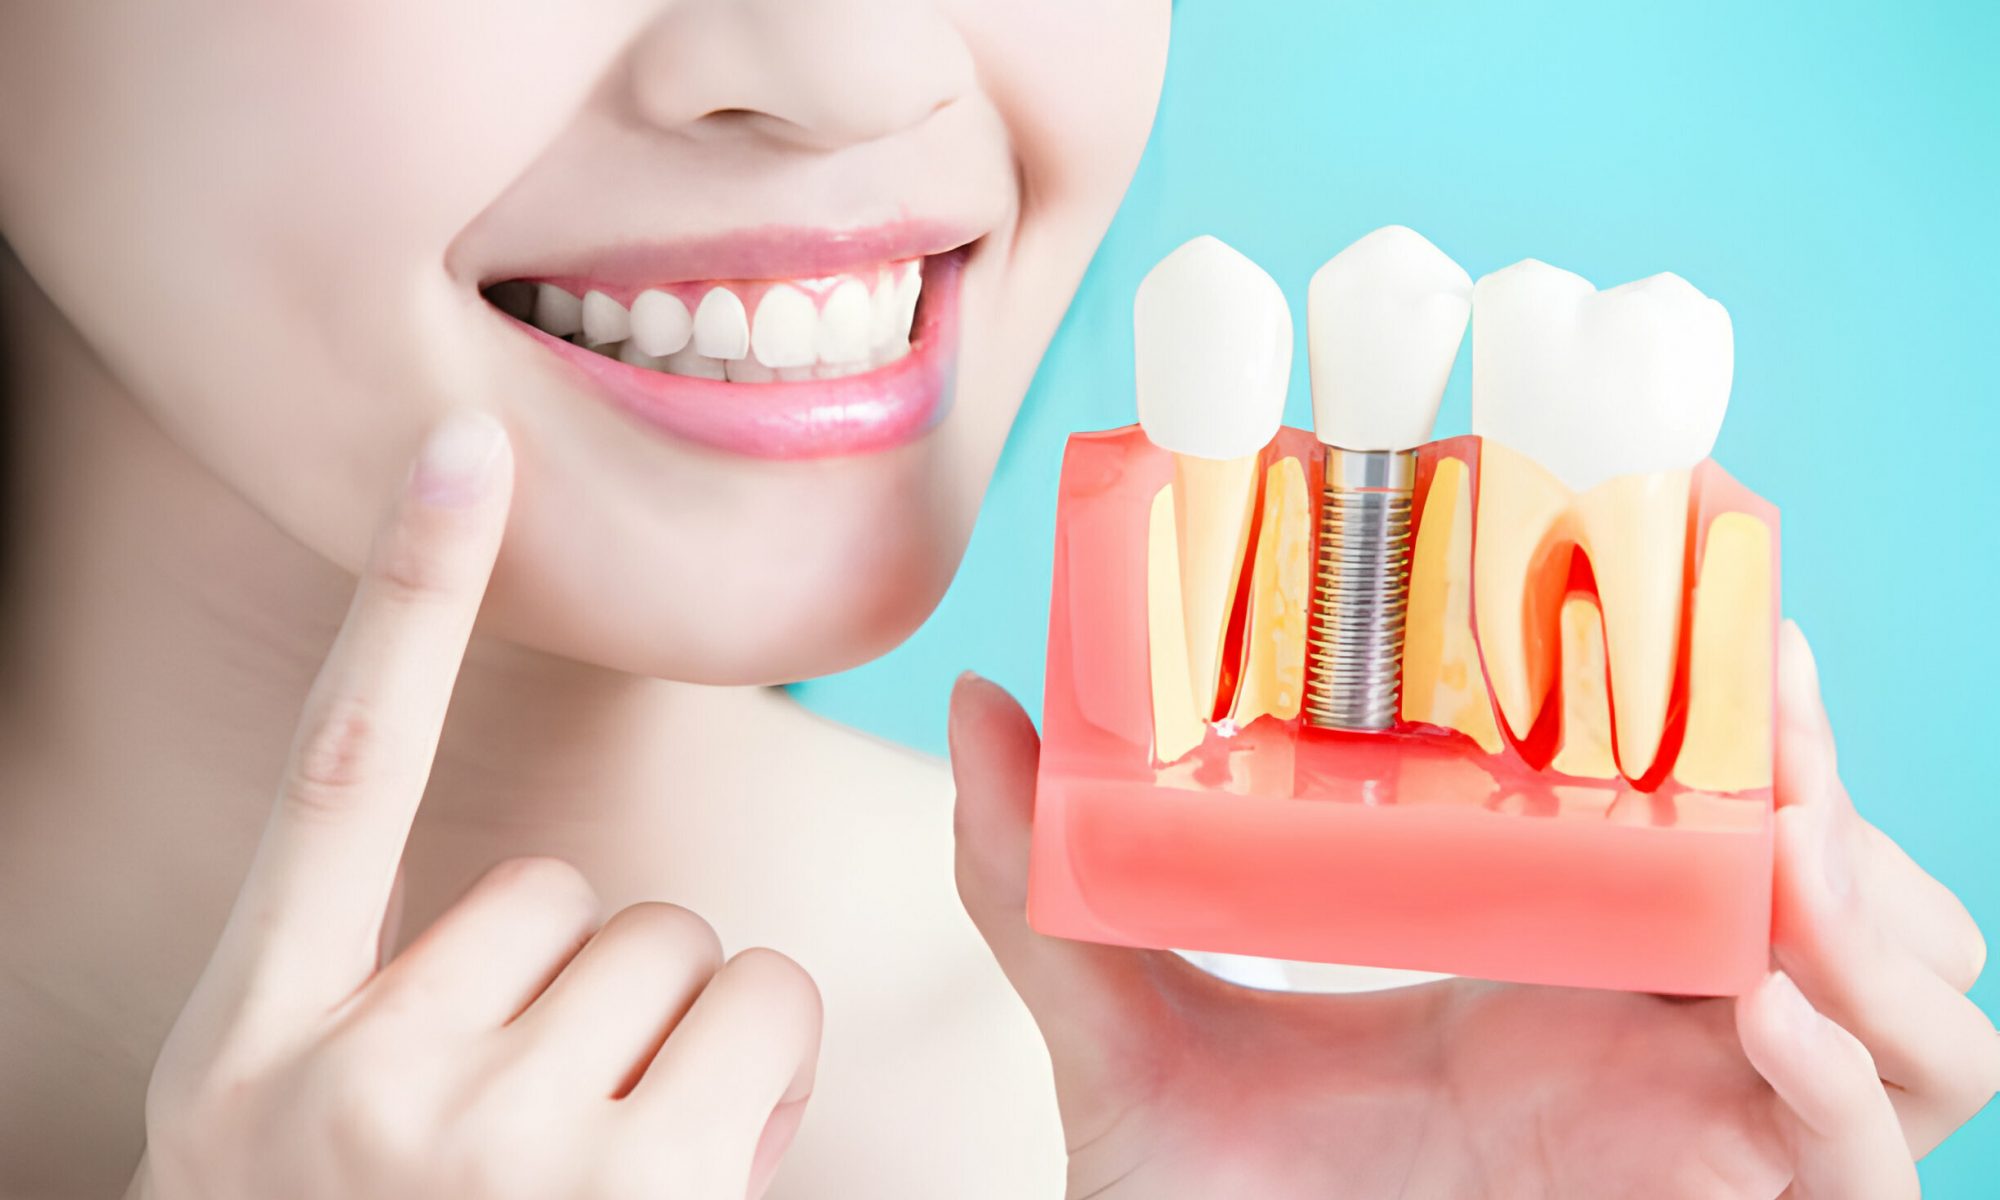 Securing Your Smile: A Guide On How To Fix Loose Dental Implants_FI